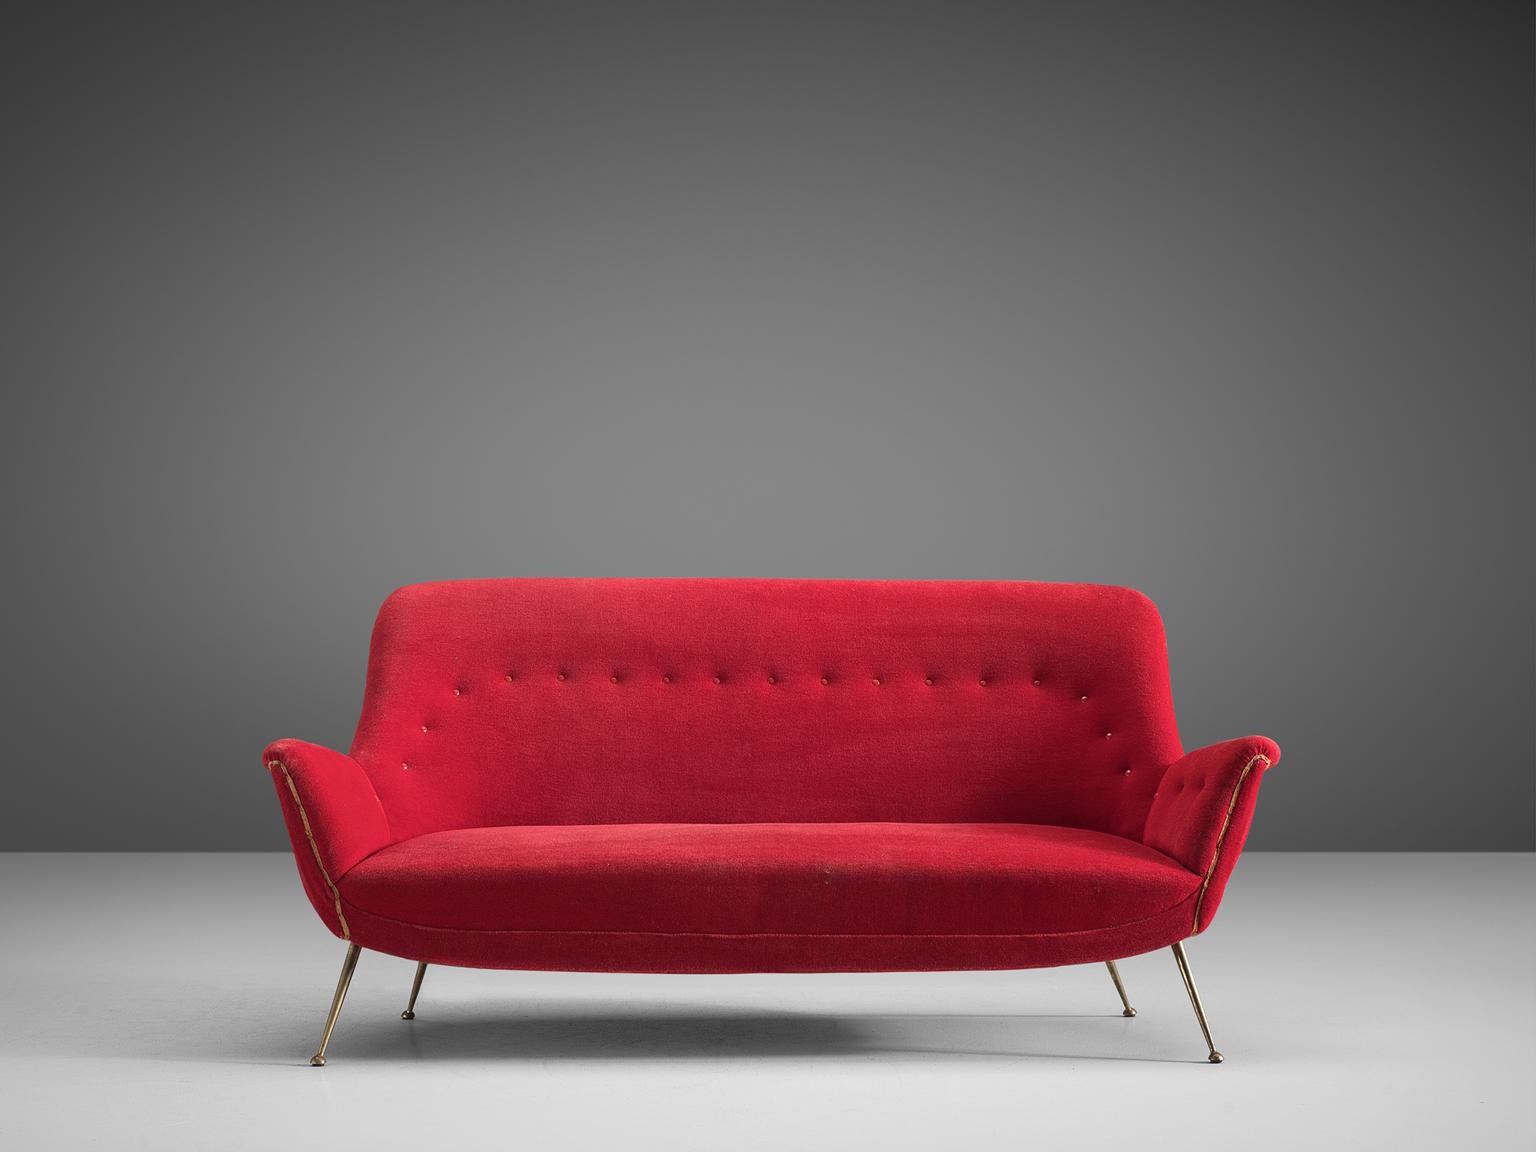 Sofa, red fabric and metal, Italy,1950s.

This gorgeous Venetian sofa is an iconic example of Italian design from the 1950s. Organic and sculptural, this two-and-a-half-seat sofa is anything but minimalistic. Equipped with the original stiletto